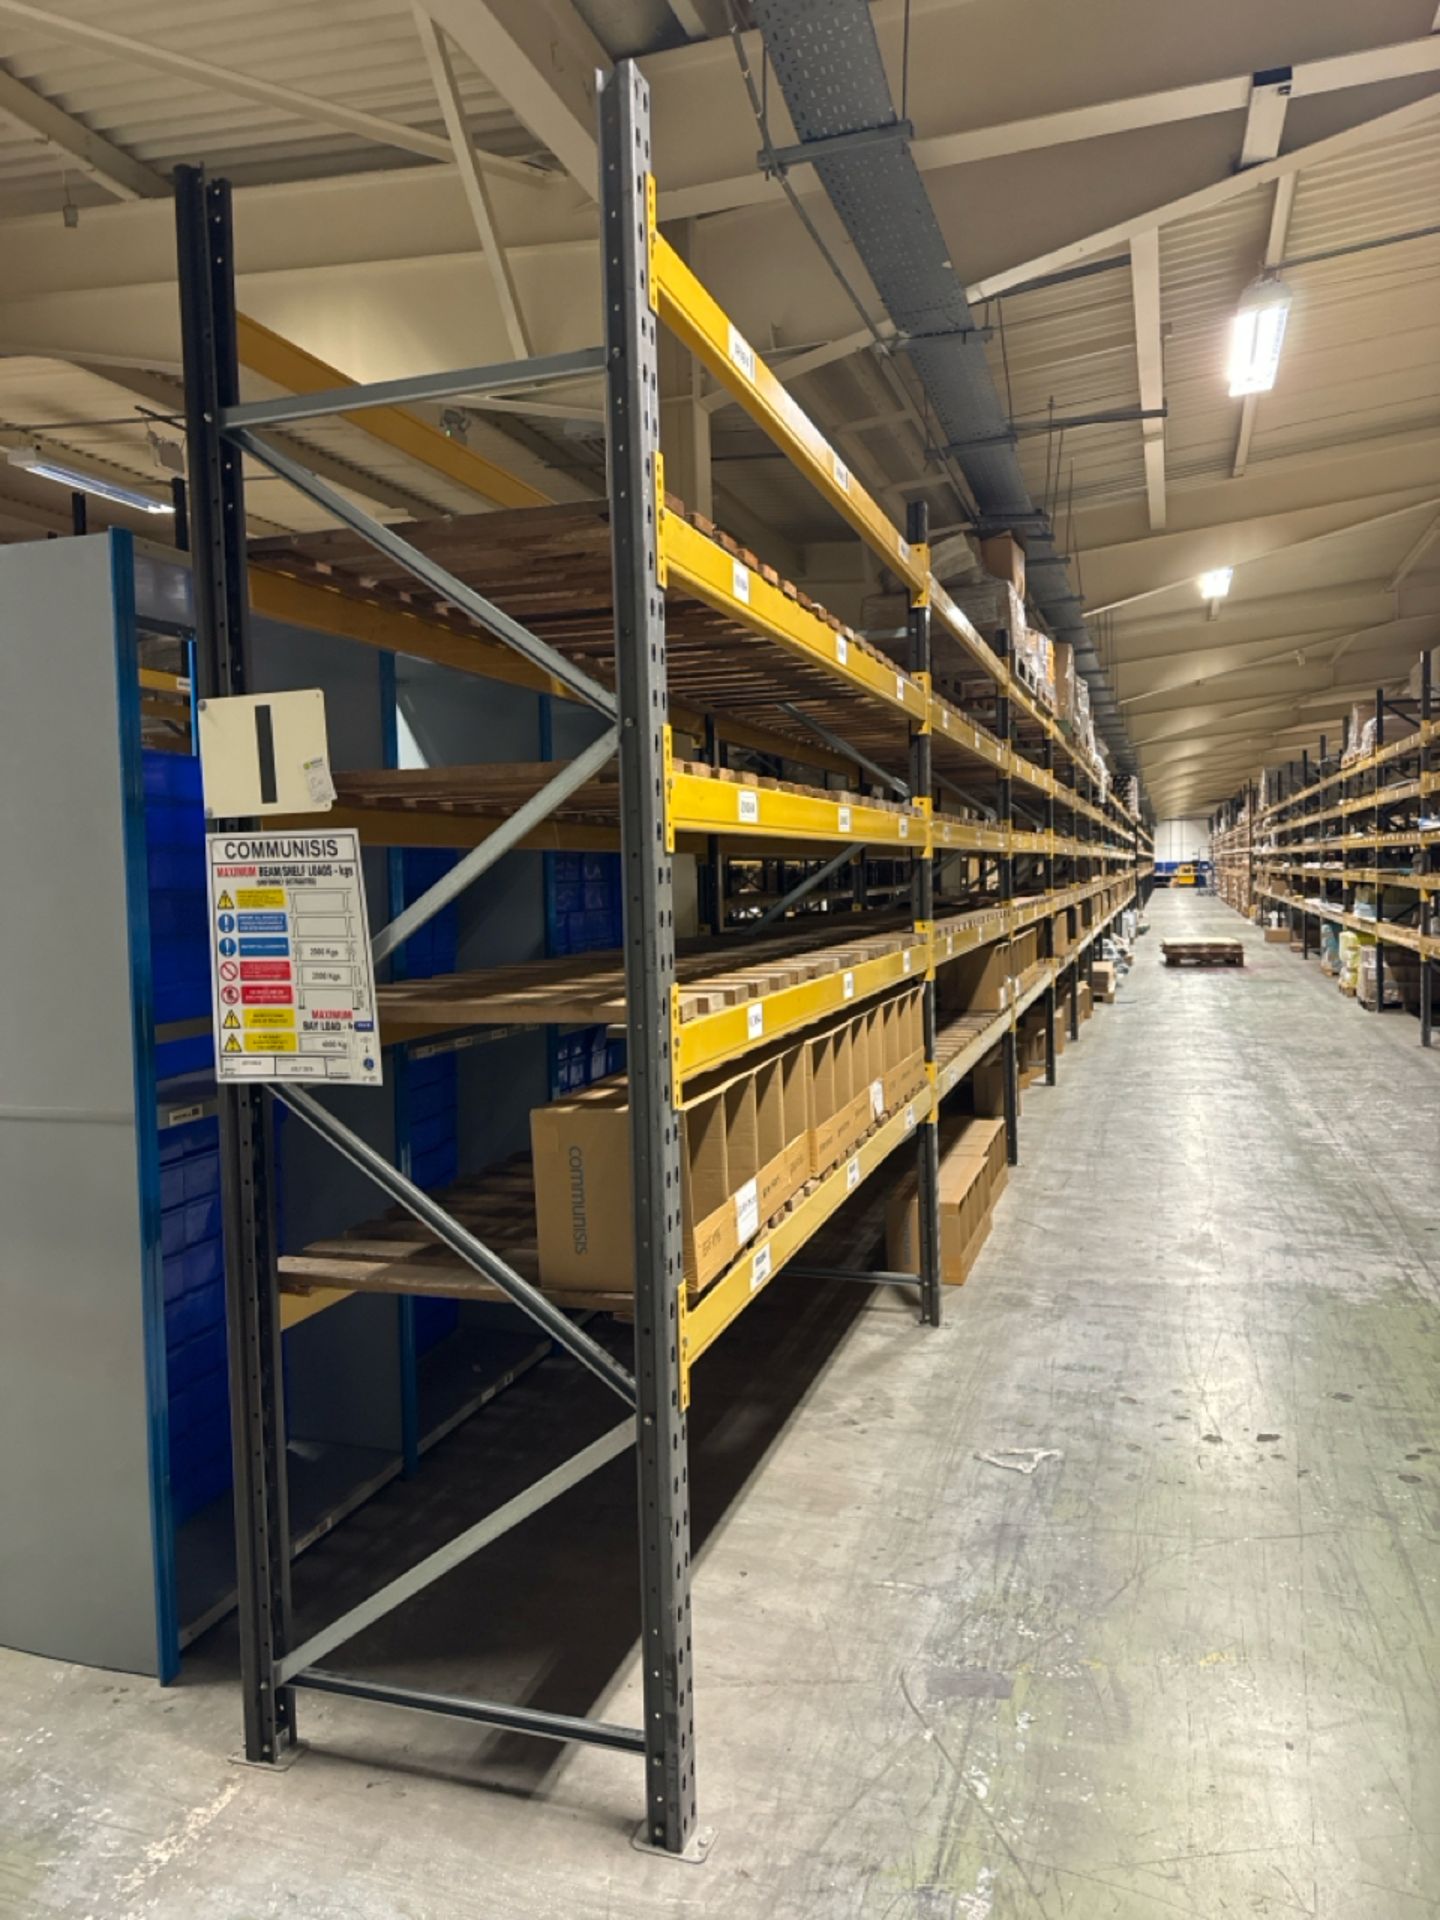 13 Bays Of Boltless Industrial Pallet Racking - Image 2 of 8